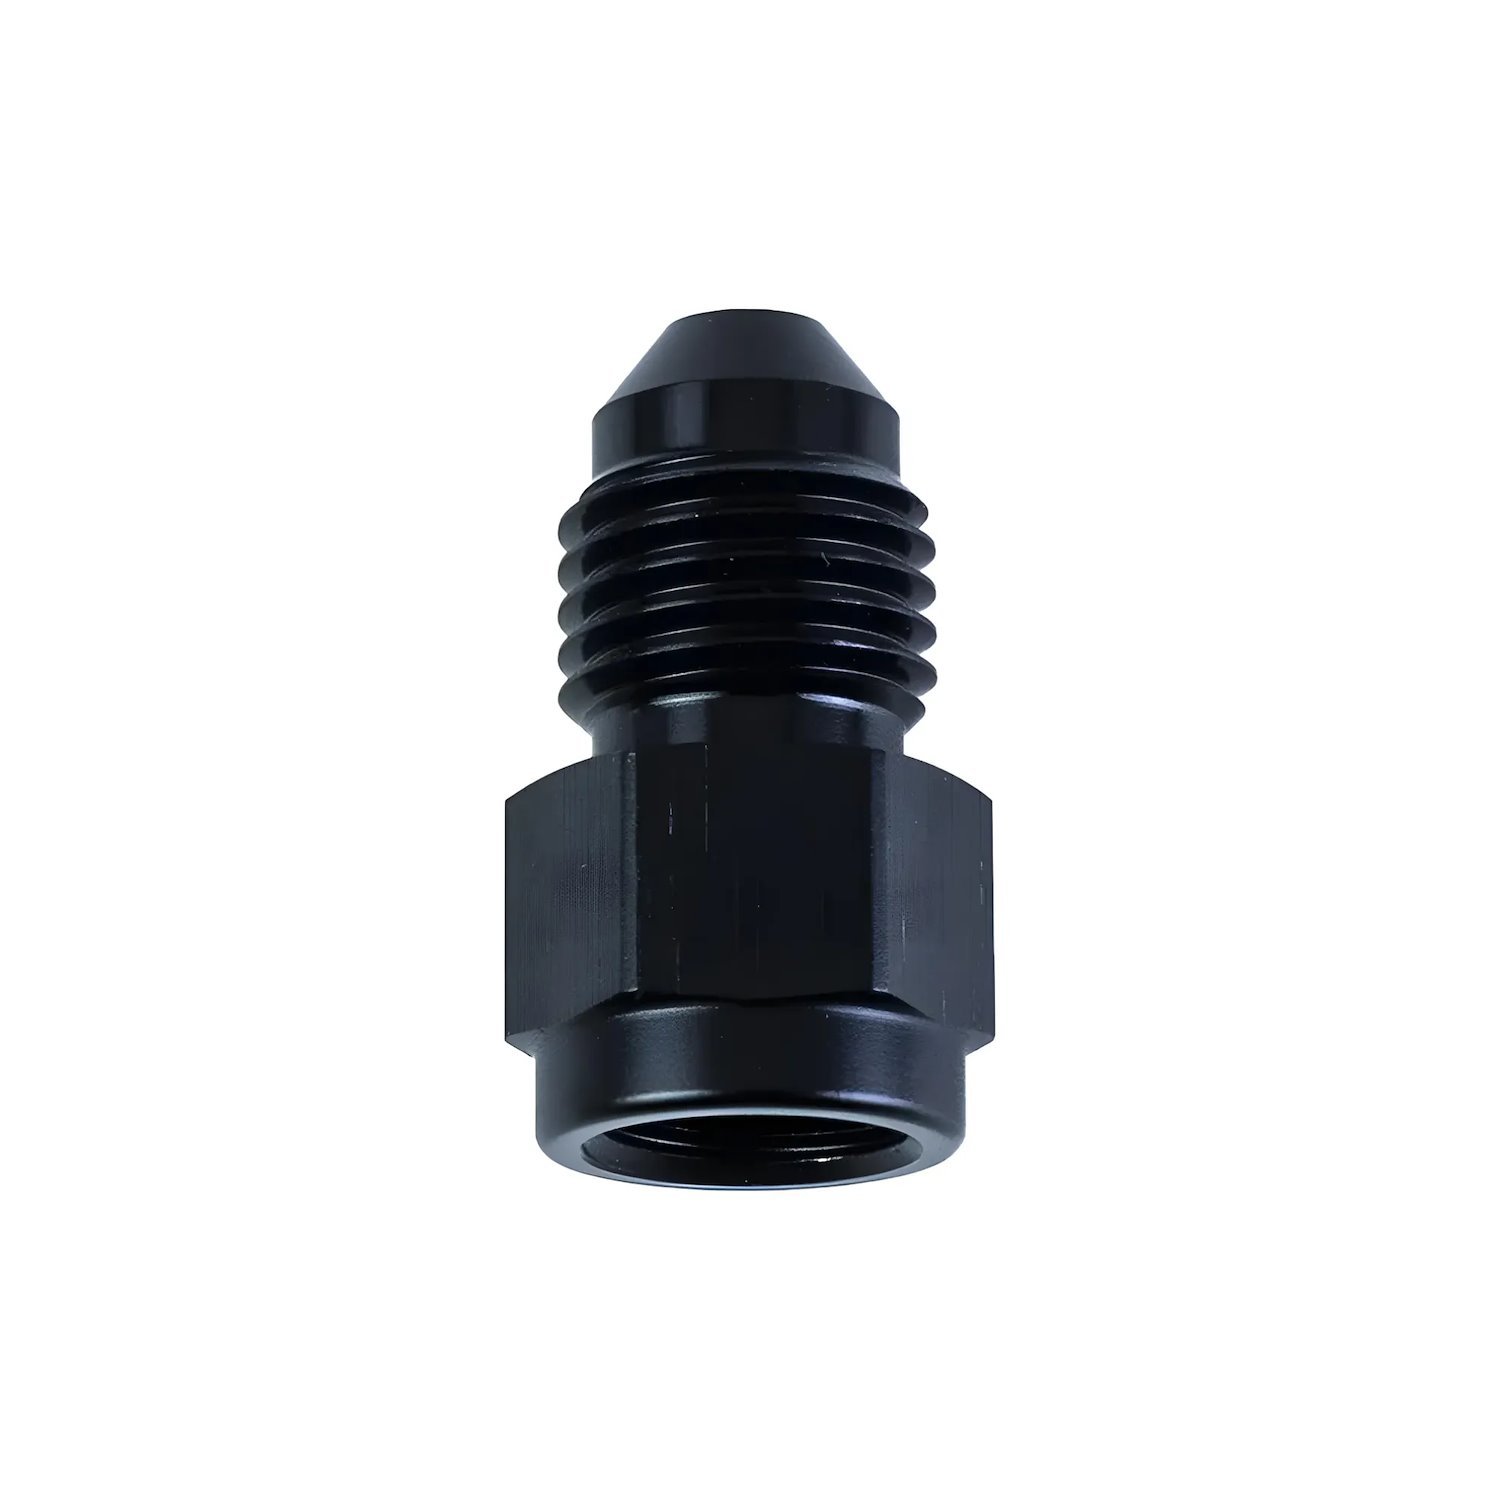 00-01614 3AN to 4AN Straight Expander Fitting, Black